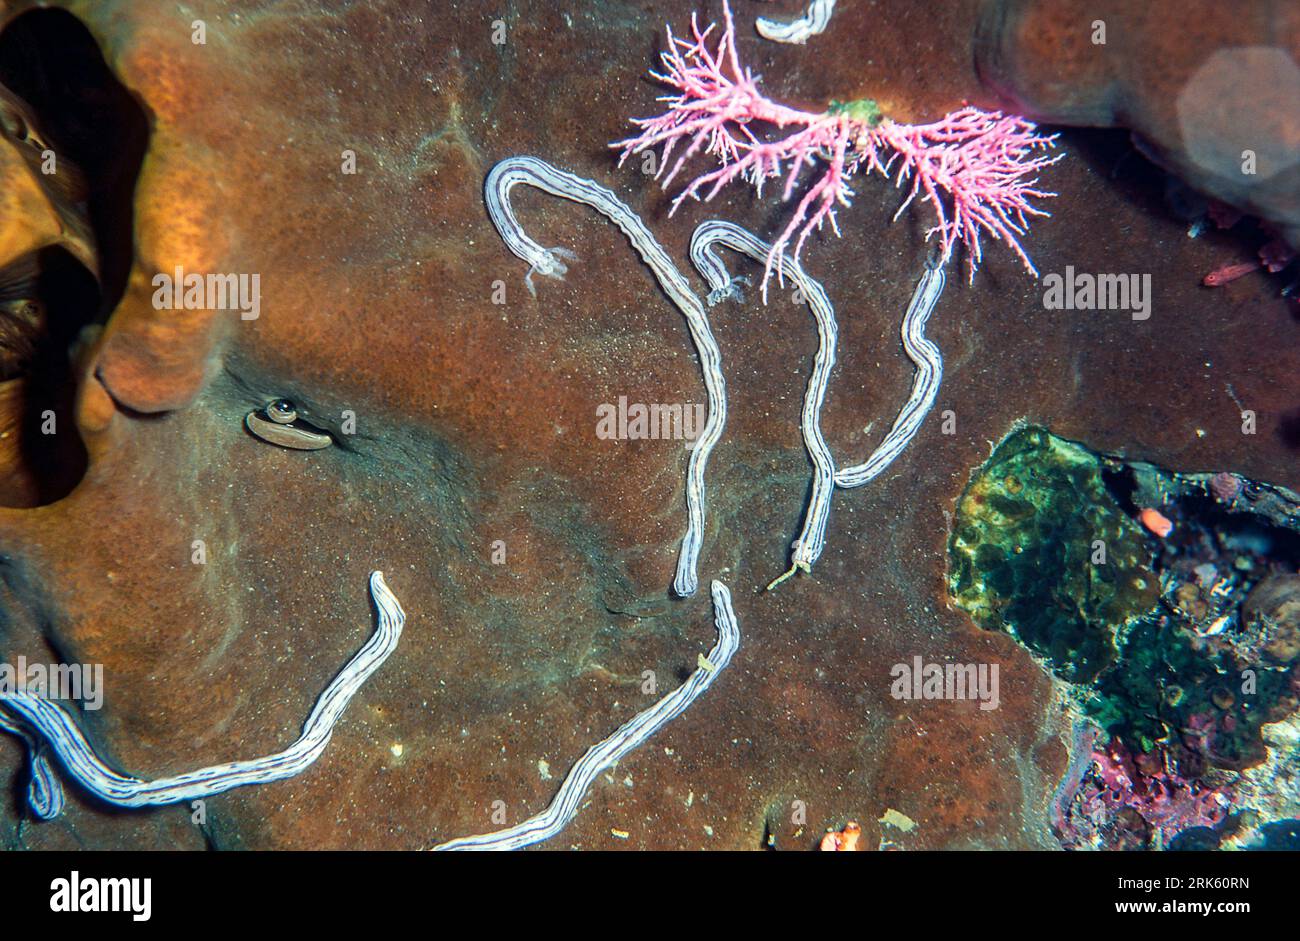 Sea cucumbers from the genus Synaptula.  Photo from Bunaken NP, North Sulawesi, Indonesia. Stock Photo